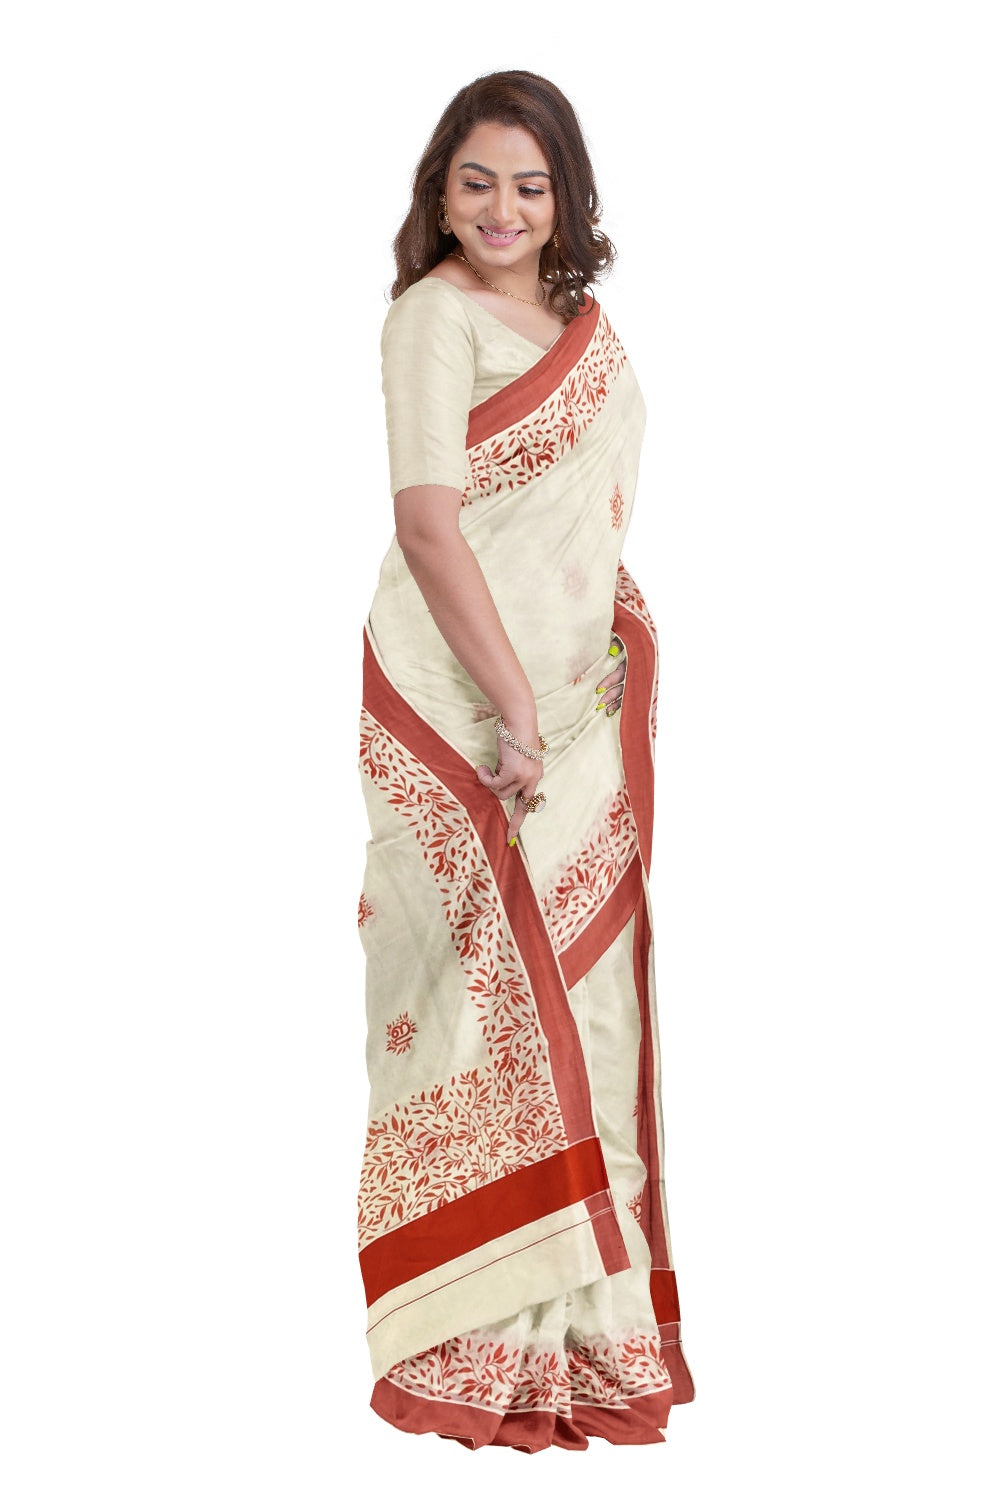 Southloom Red Border Kerala Saree with Malayalam Themed Prints (by Govt of Kerala)